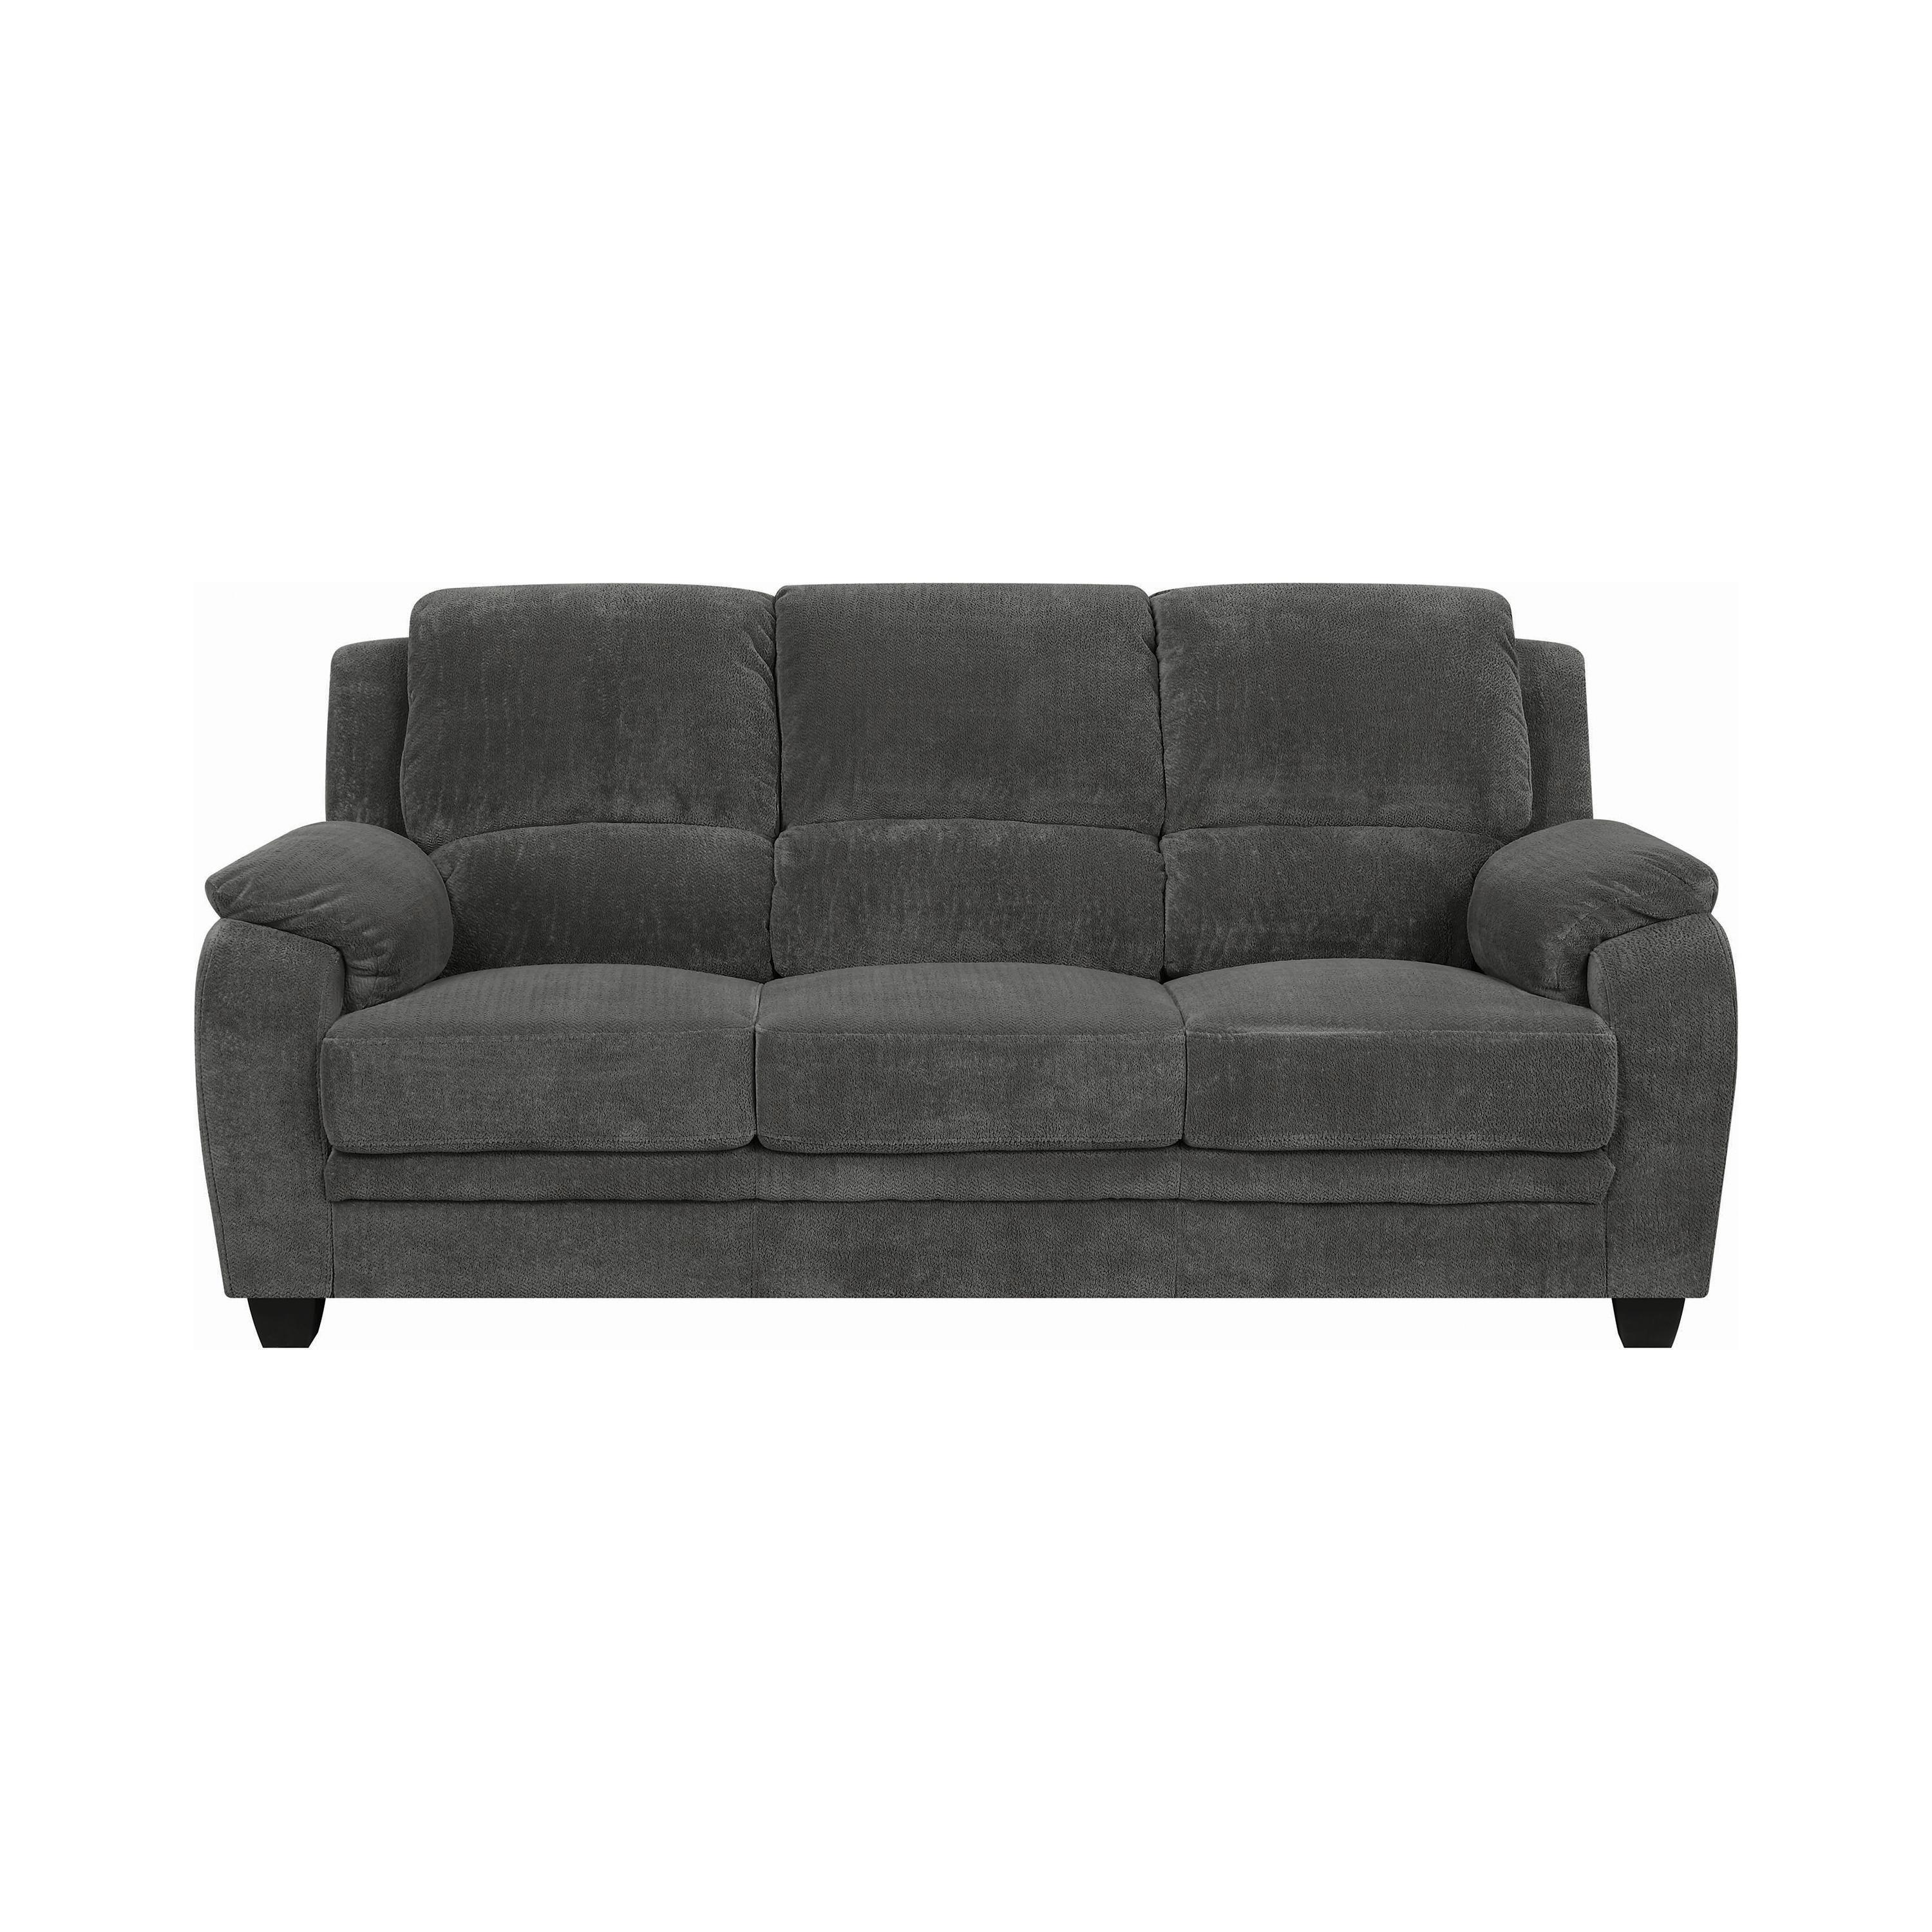 Transitional Sofa 506241 Northend 506241 in Charcoal 